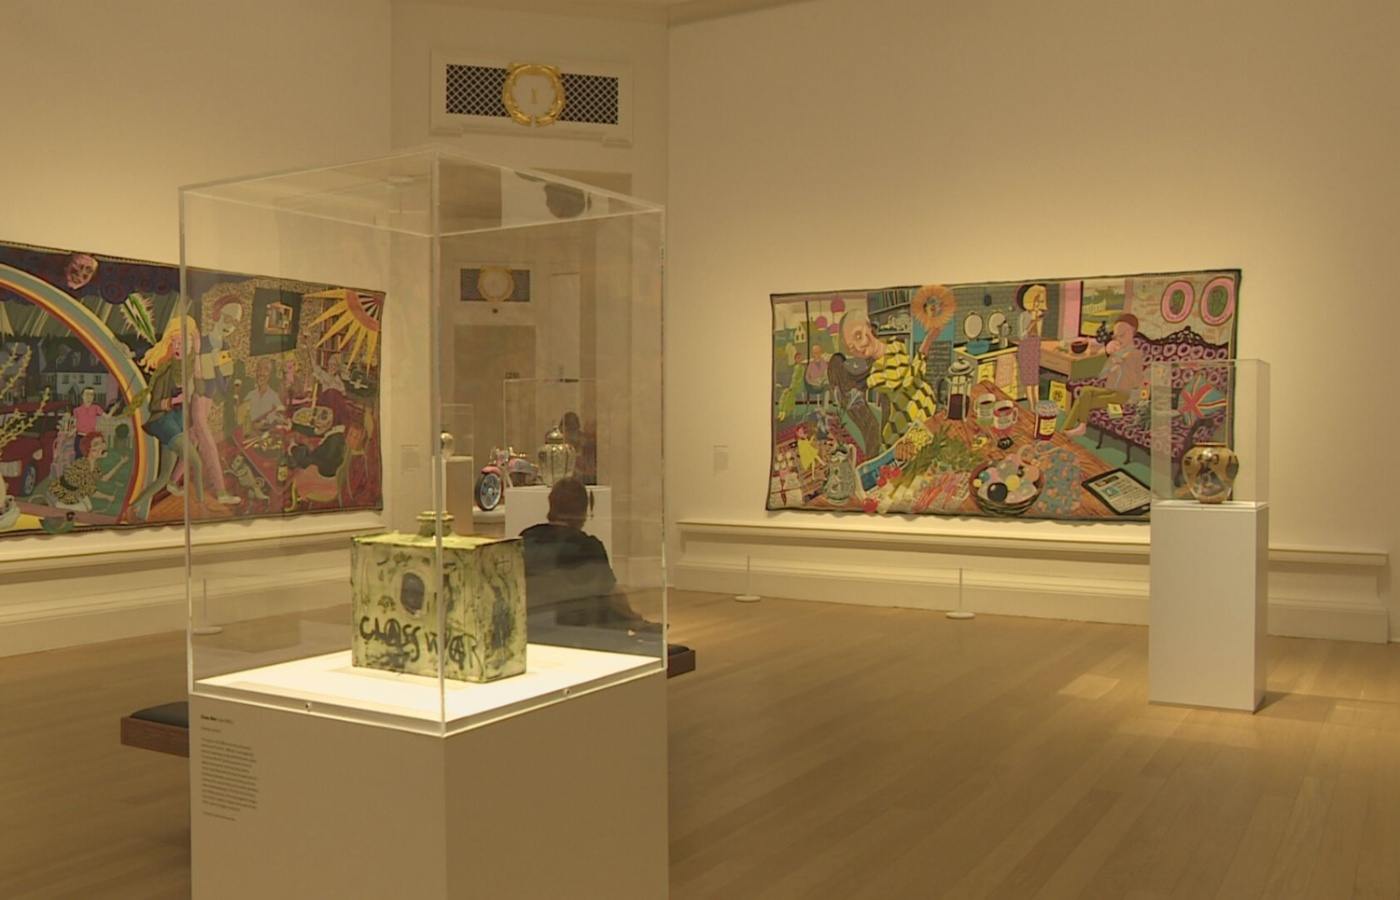 The new Grayson Perry exhibition offers a visual representation of Britain’s recent history.